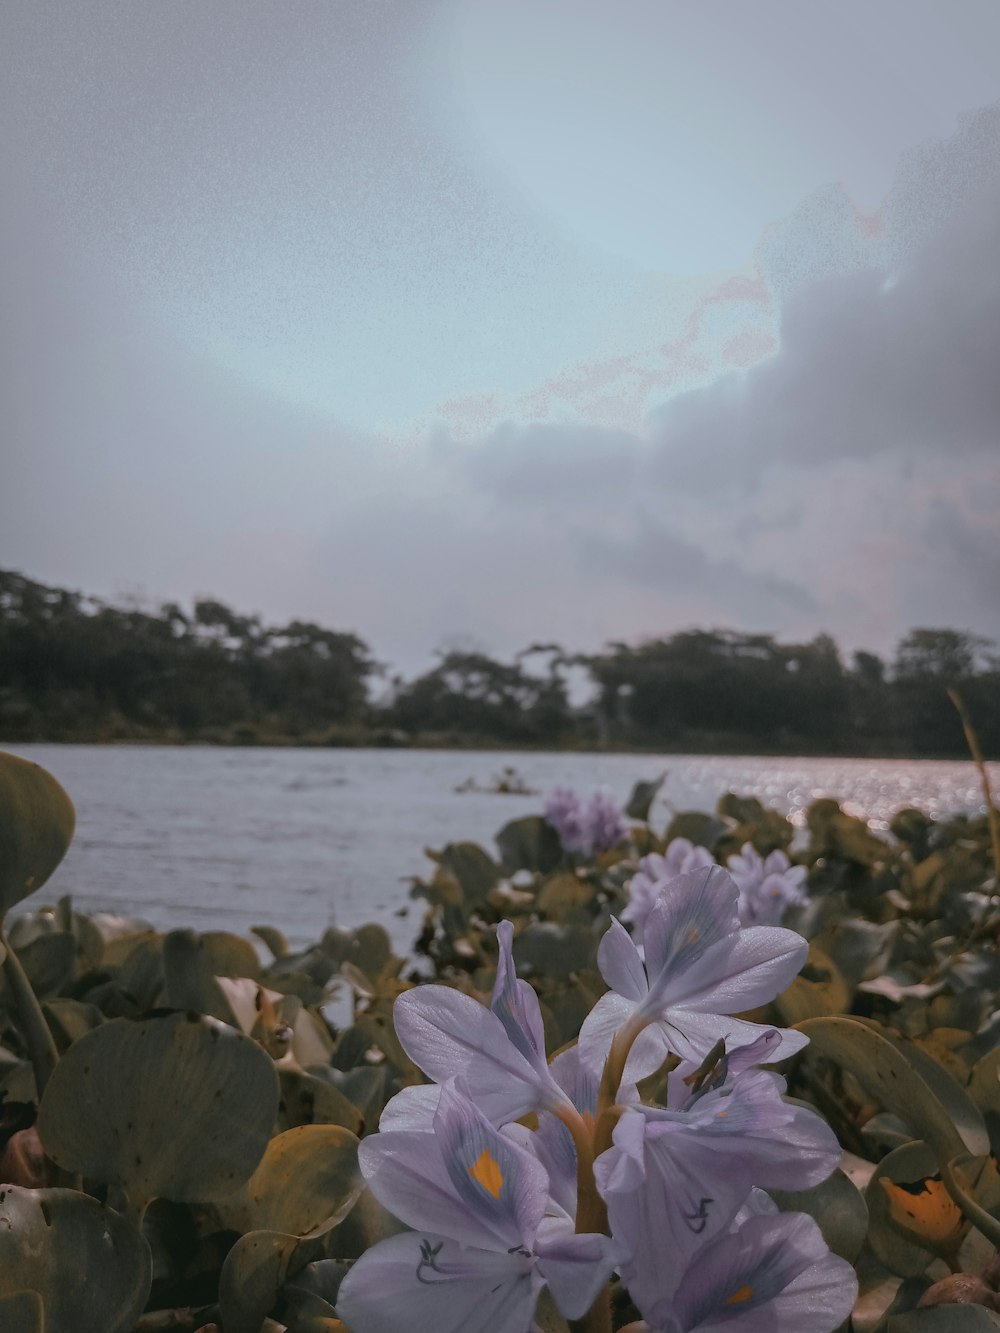 a group of flowers next to a body of water